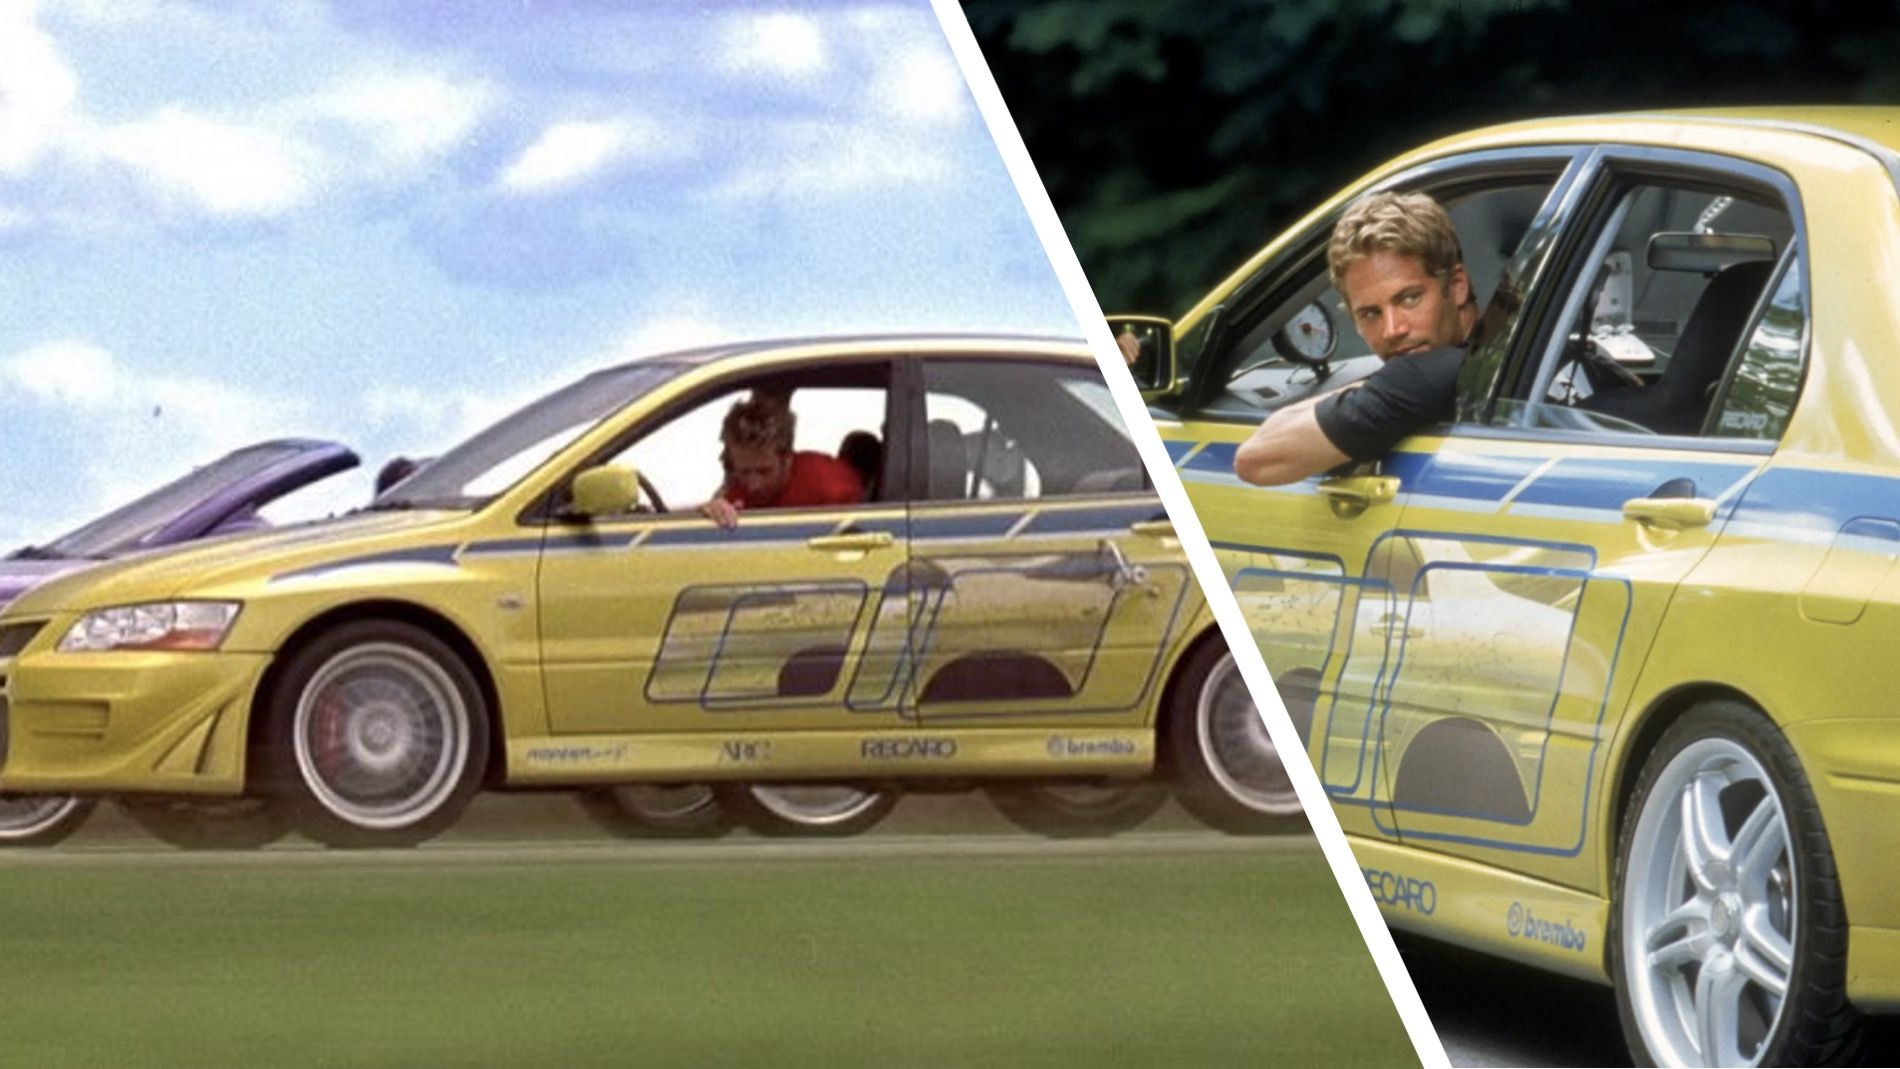 Mitsubishi Lancer Evolution VII driven by Brian O'Conor, Paul Walker in Fast and Furious